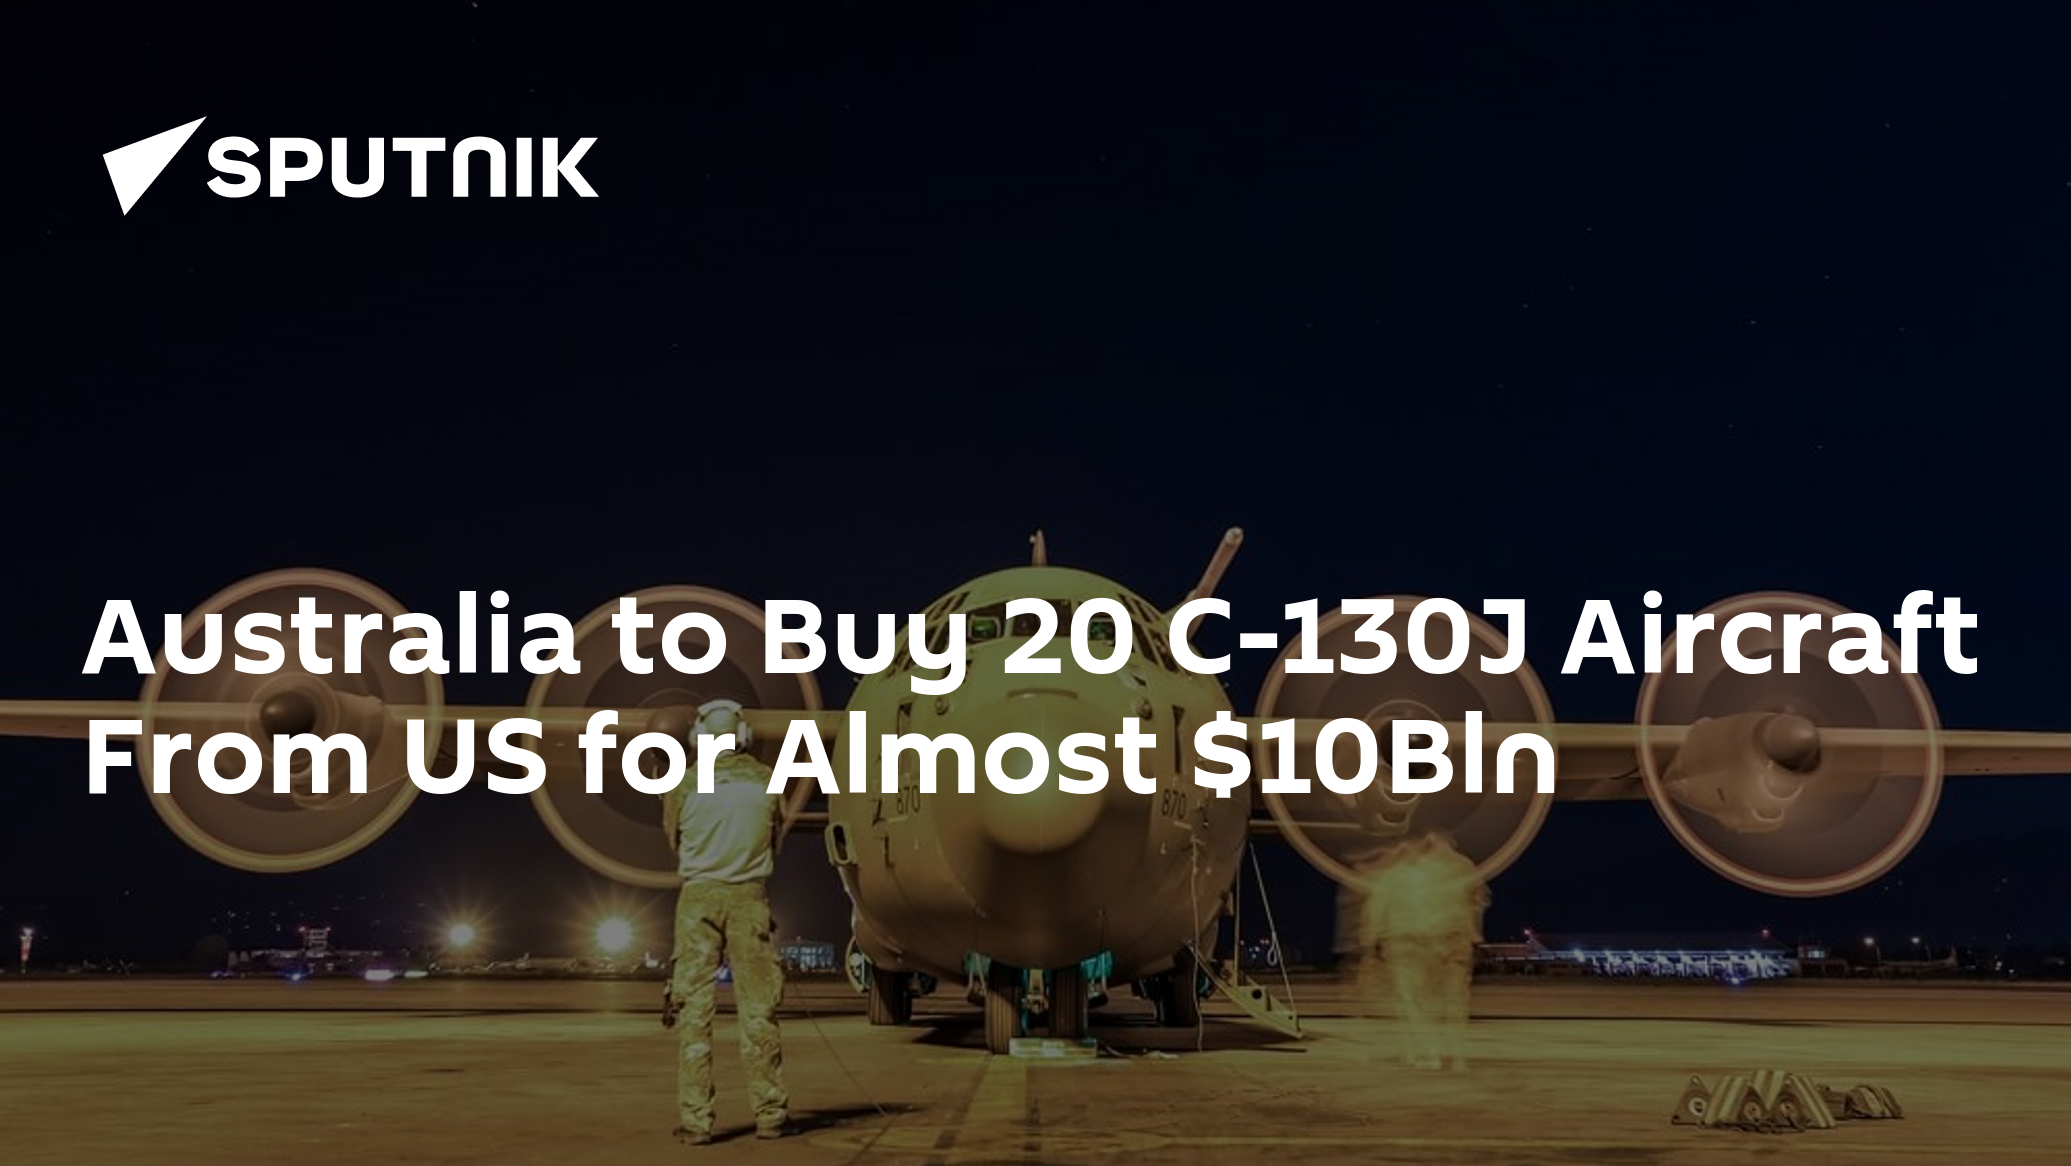 Australia to Buy 20 C-130J Aircraft From US for Almost Bln